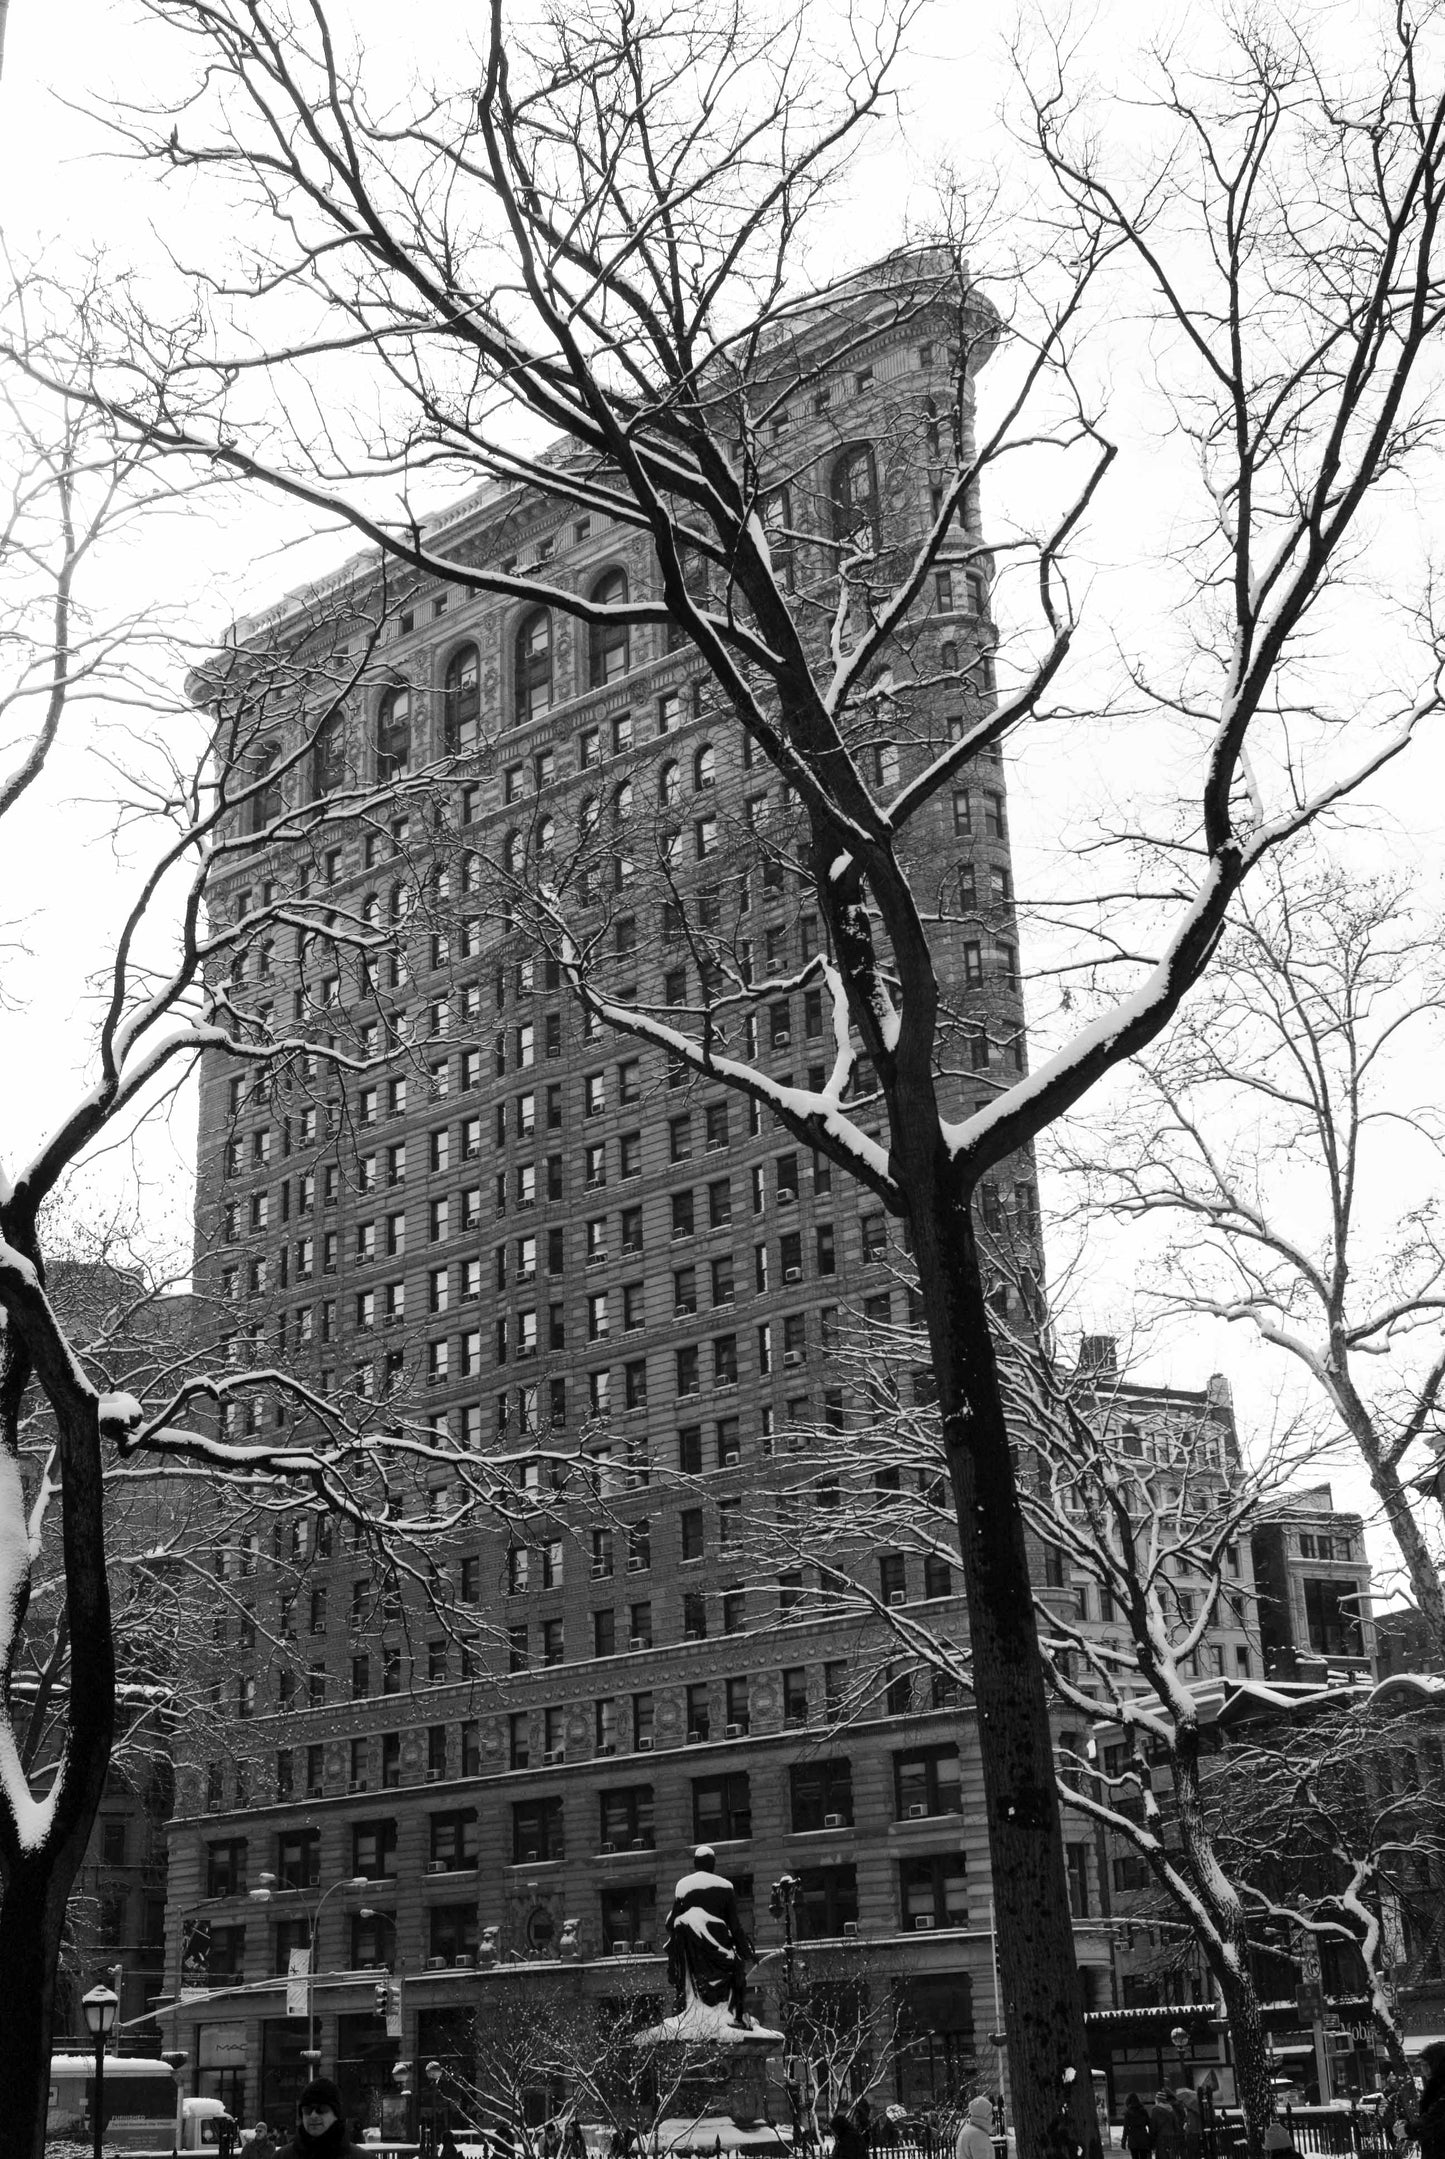 Alessandra Mattanza | CONTINUITY OF A STREET, Upper West Side, New York. The Flat Iron building from Madison Square Park. Available as an art print or as a photographic print on acrylic glass.